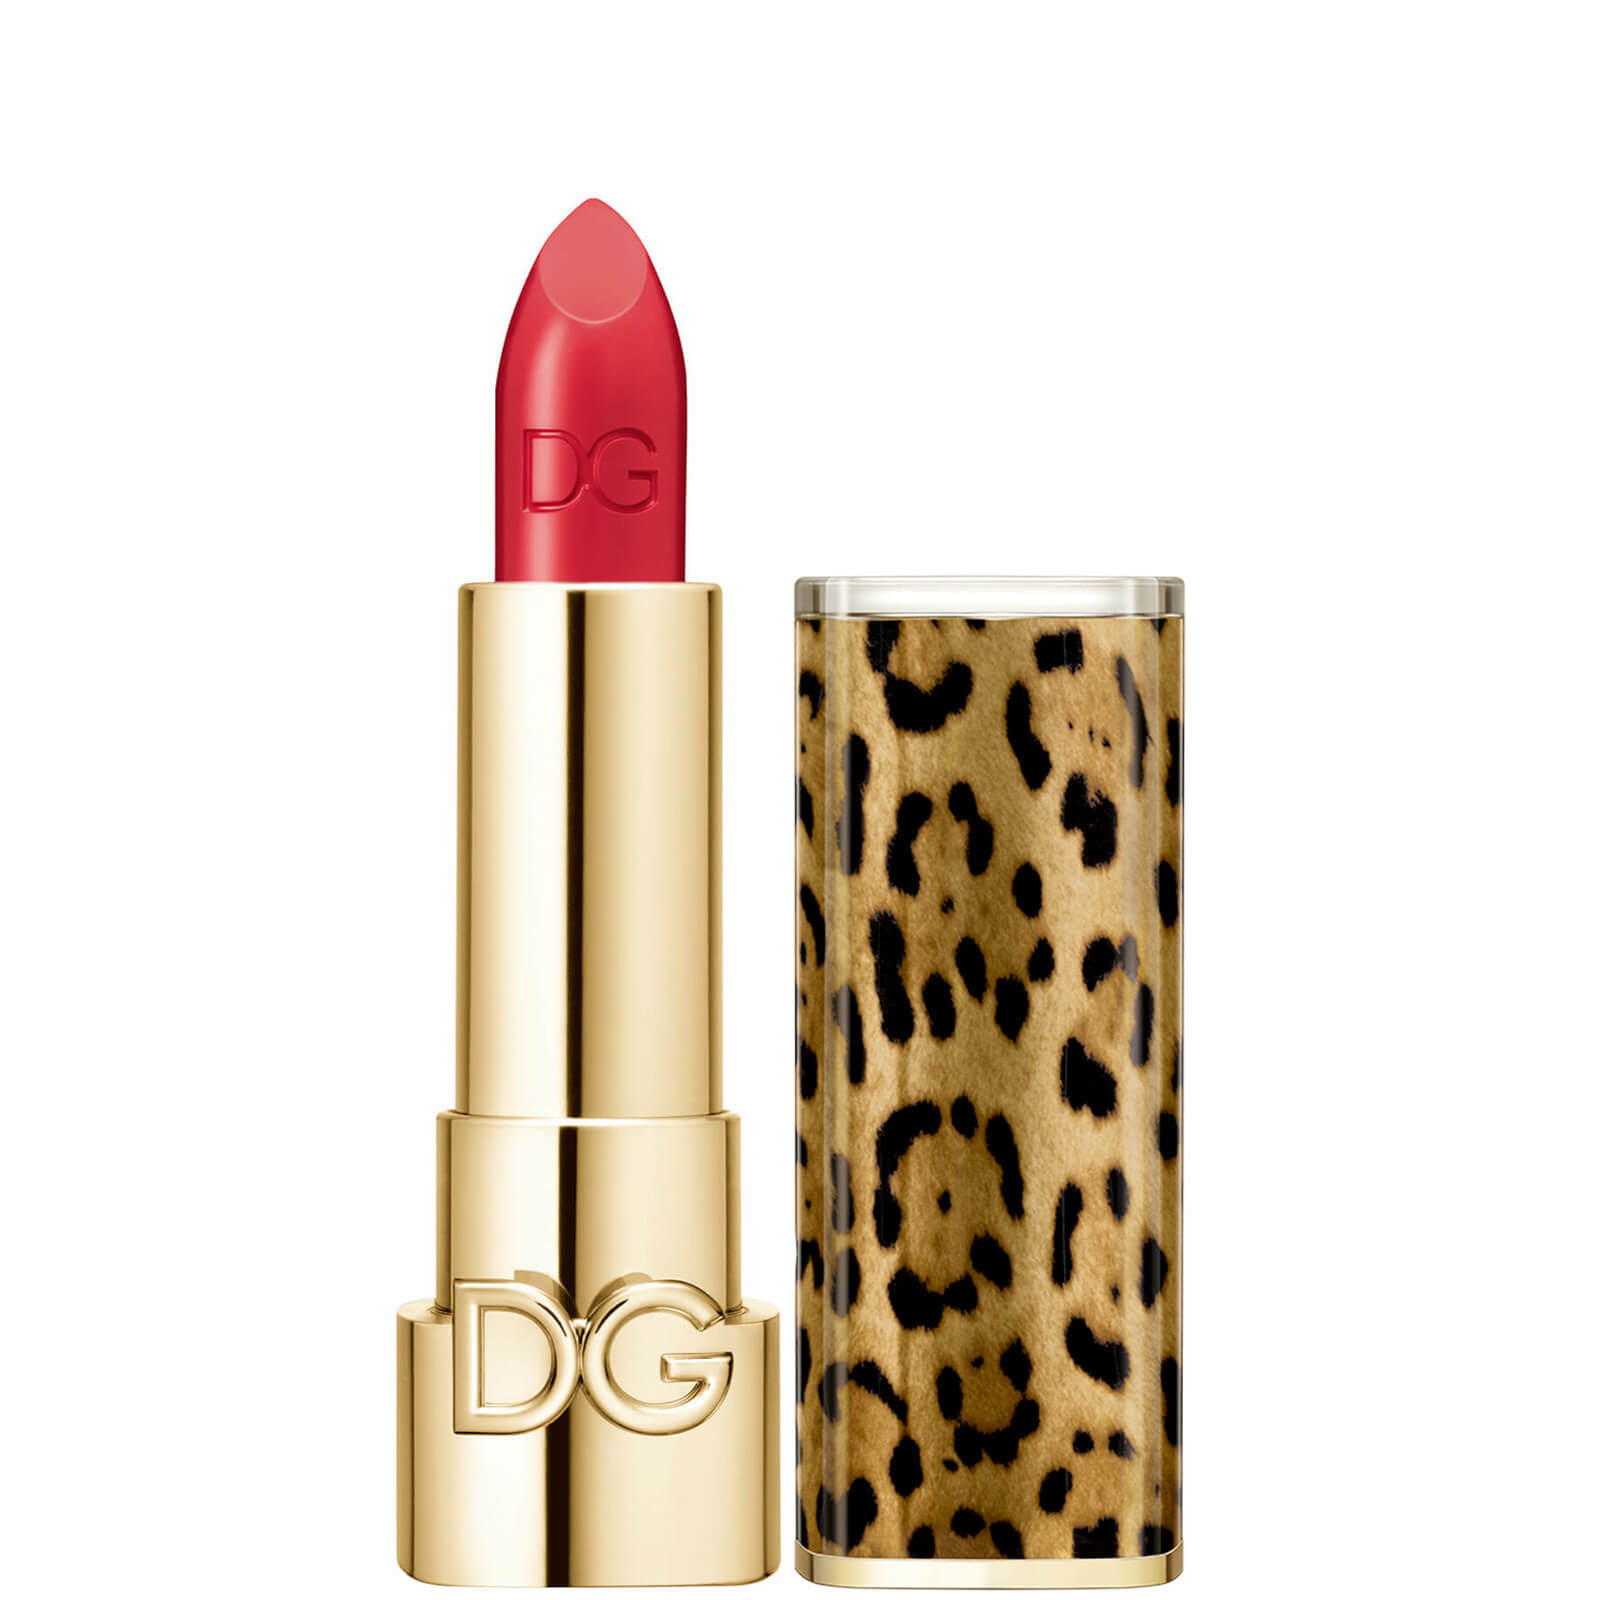 Dolce&Gabbana The Only One Lipstick + Cap (Animalier) (Various Shades) - 630 DGLOVER